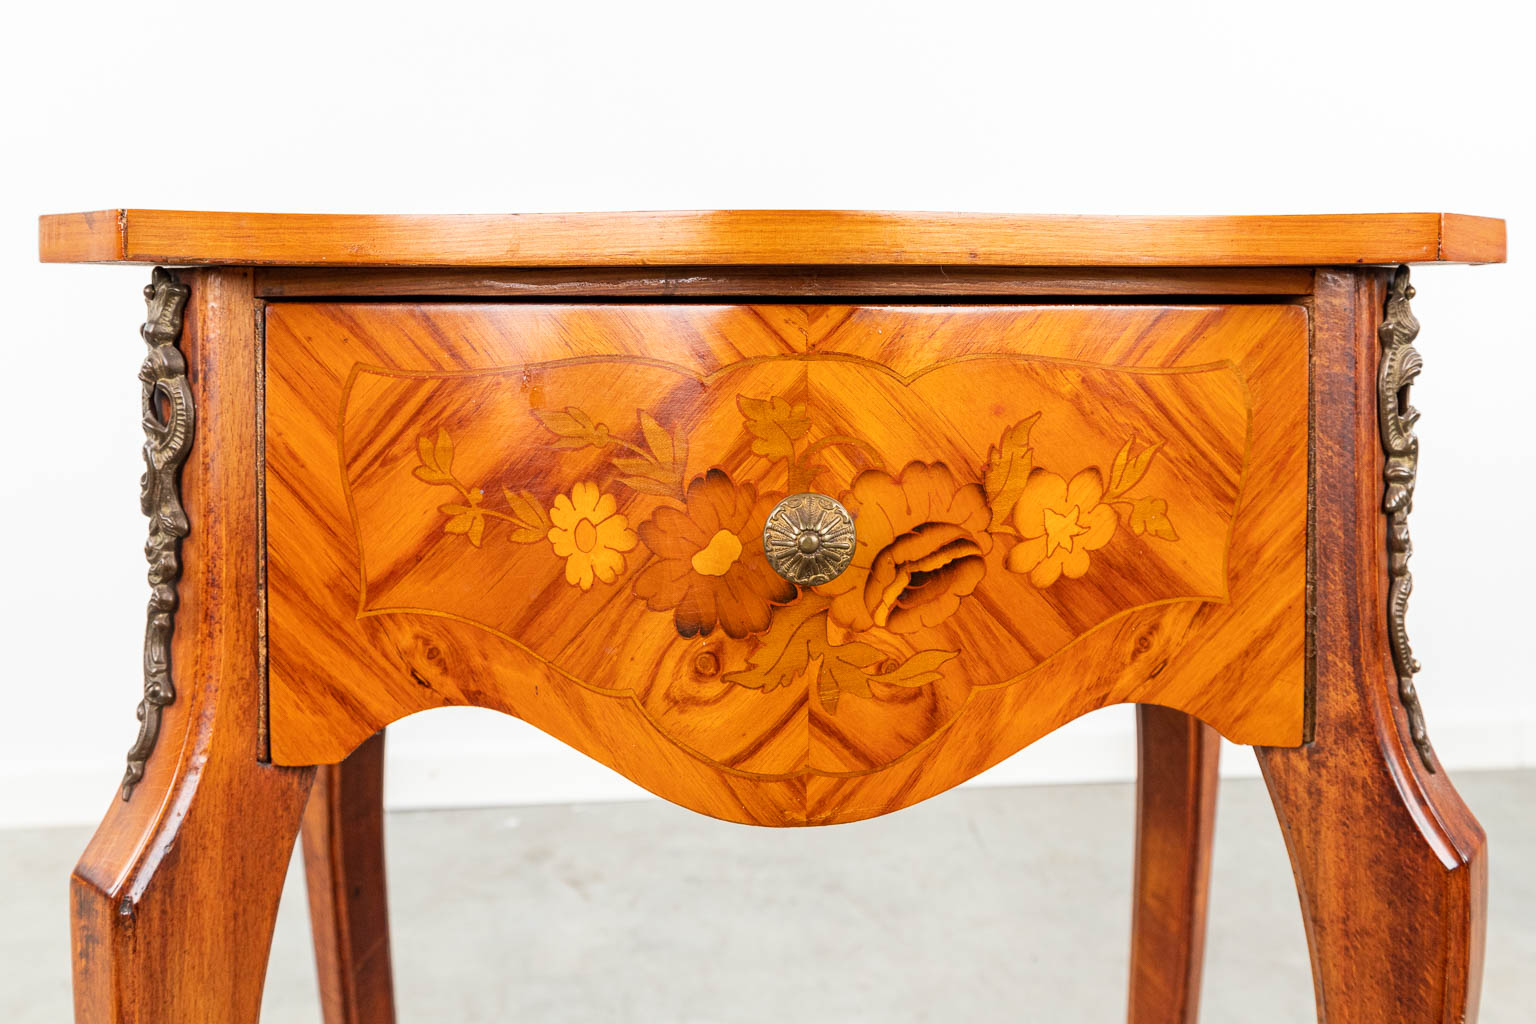 A side table finished with marquetry inlay and mounted with bronze. (H:69cm)